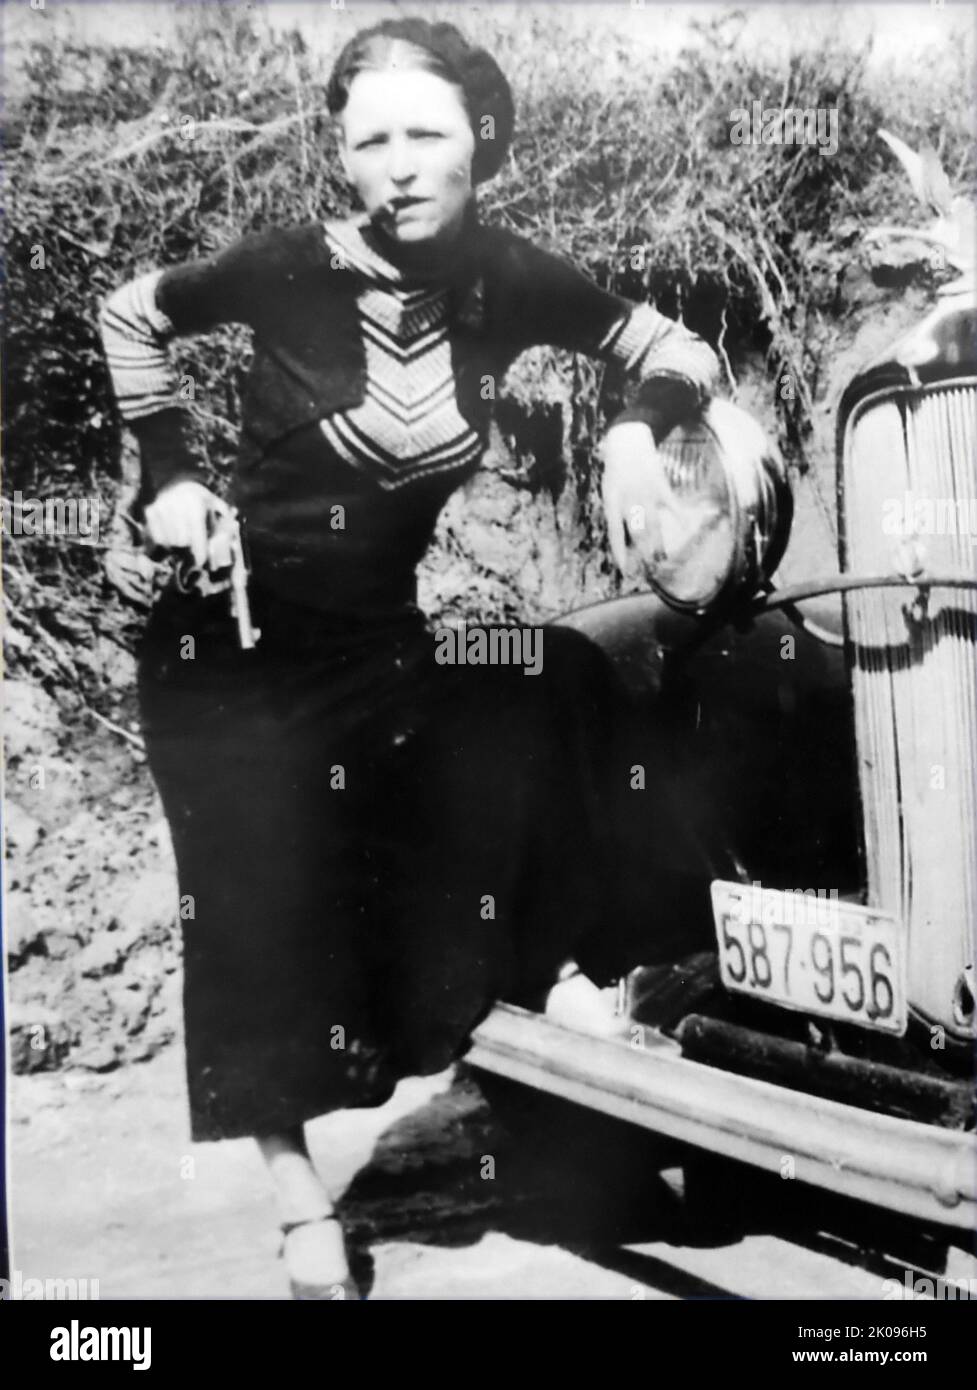 Bonnie and Clyde. Bonnie Elizabeth Parker (October 1, 1910 - May 23, 1934) and Clyde Chestnut Barrow (March 24, 1909 - May 23, 1934) were an American criminal couple who travelled the Central United States with their gang during the Great Depression, known for their bank robberies, although they preferred to rob small stores or rural funeral homes. Their exploits captured the attention of the American press and its readership during what is occasionally referred to as the 'public enemy era' between 1931 and 1934. Stock Photo